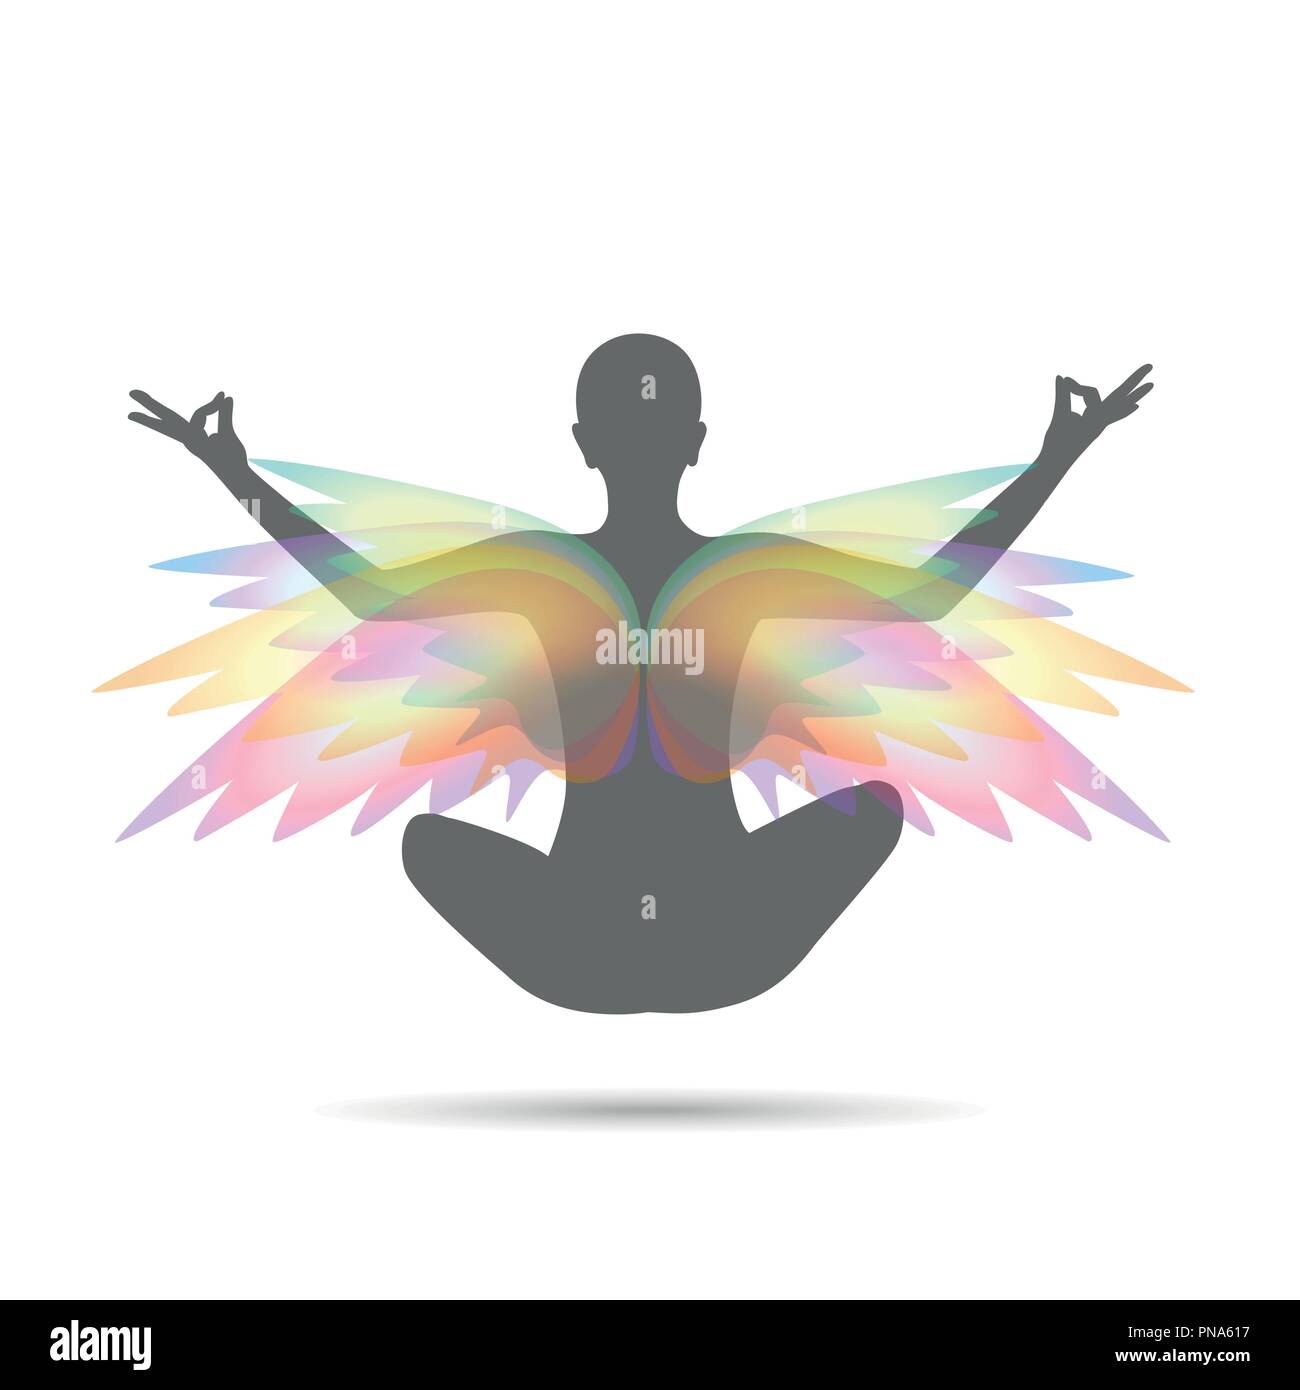 young person sitting in yoga meditation lotus position with colorful wings silhouette vector illustration EPS10 Stock Vector